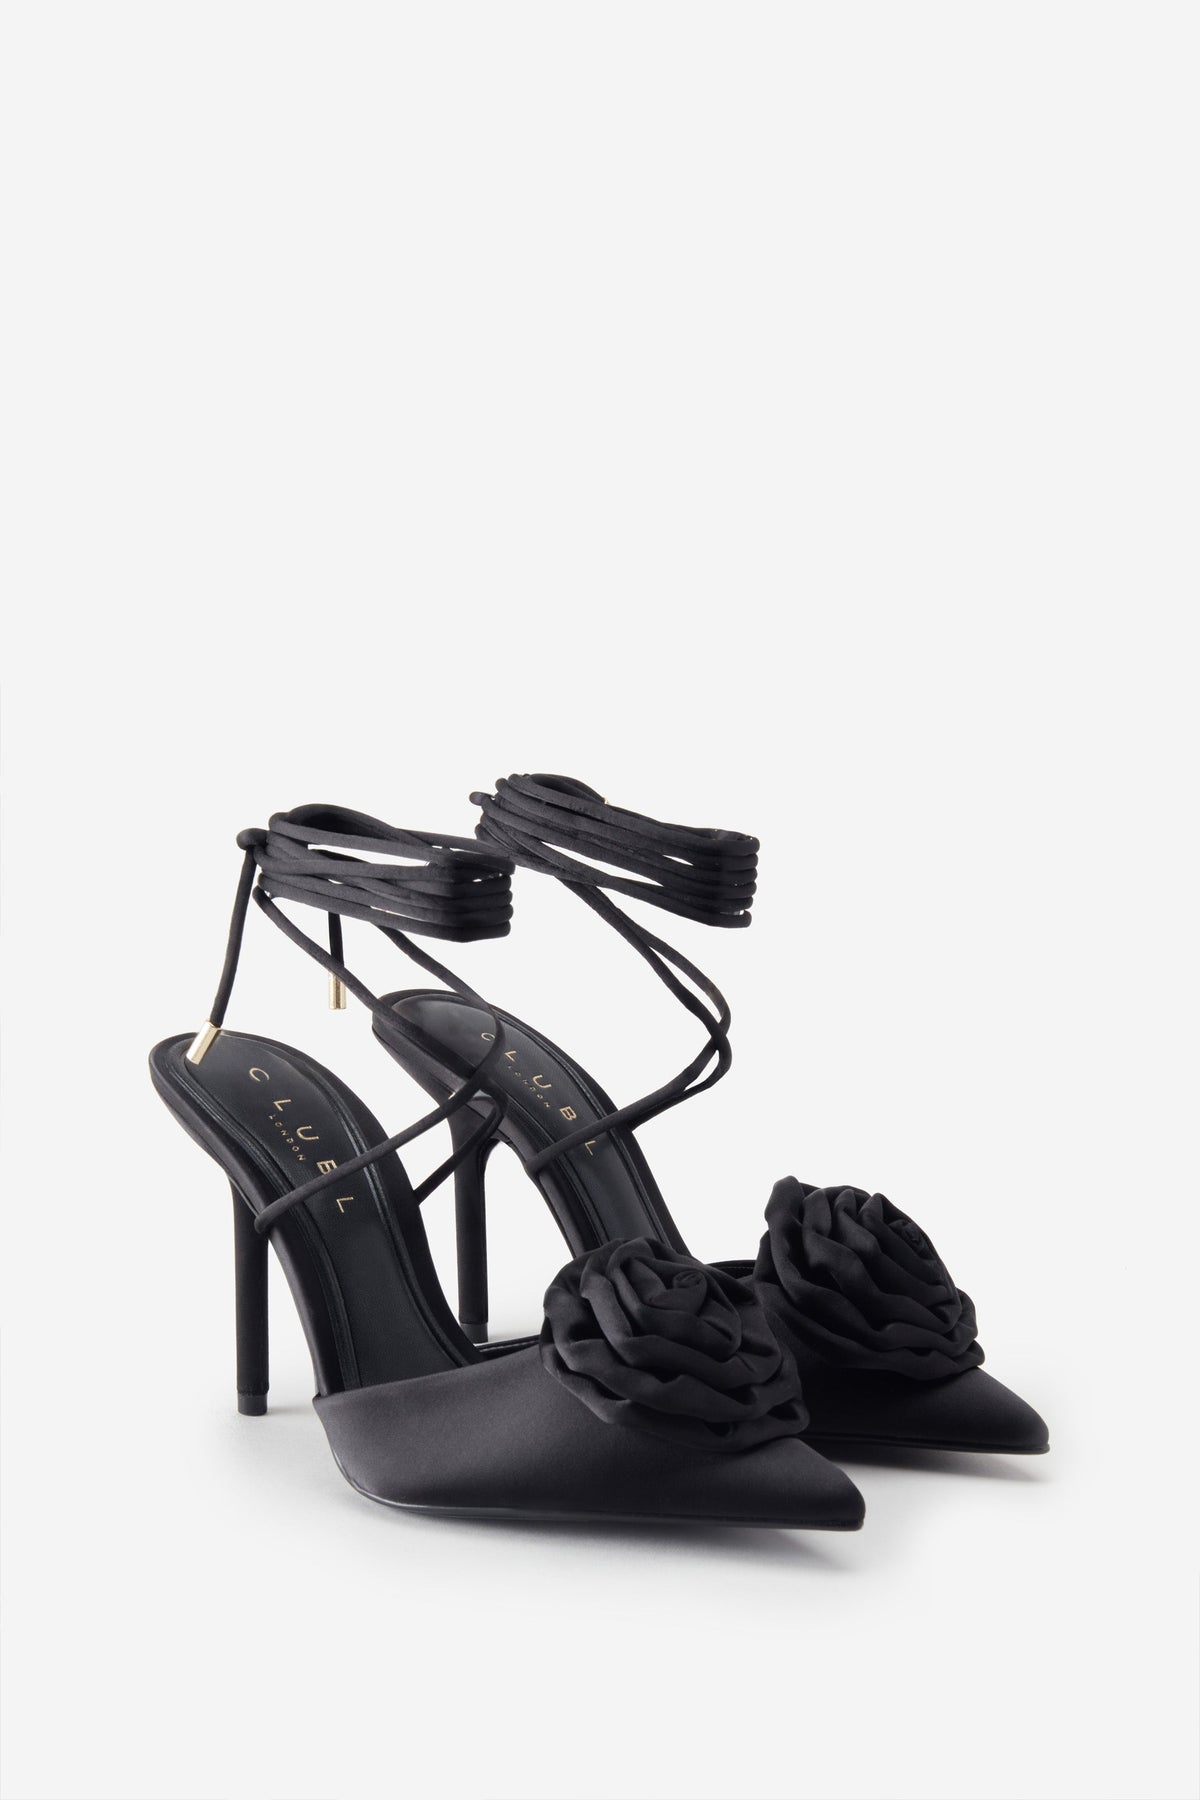 Sharpened Black Lace-Up Clear Stiletto Heels With Diamante Flowers – Club L  London - USA